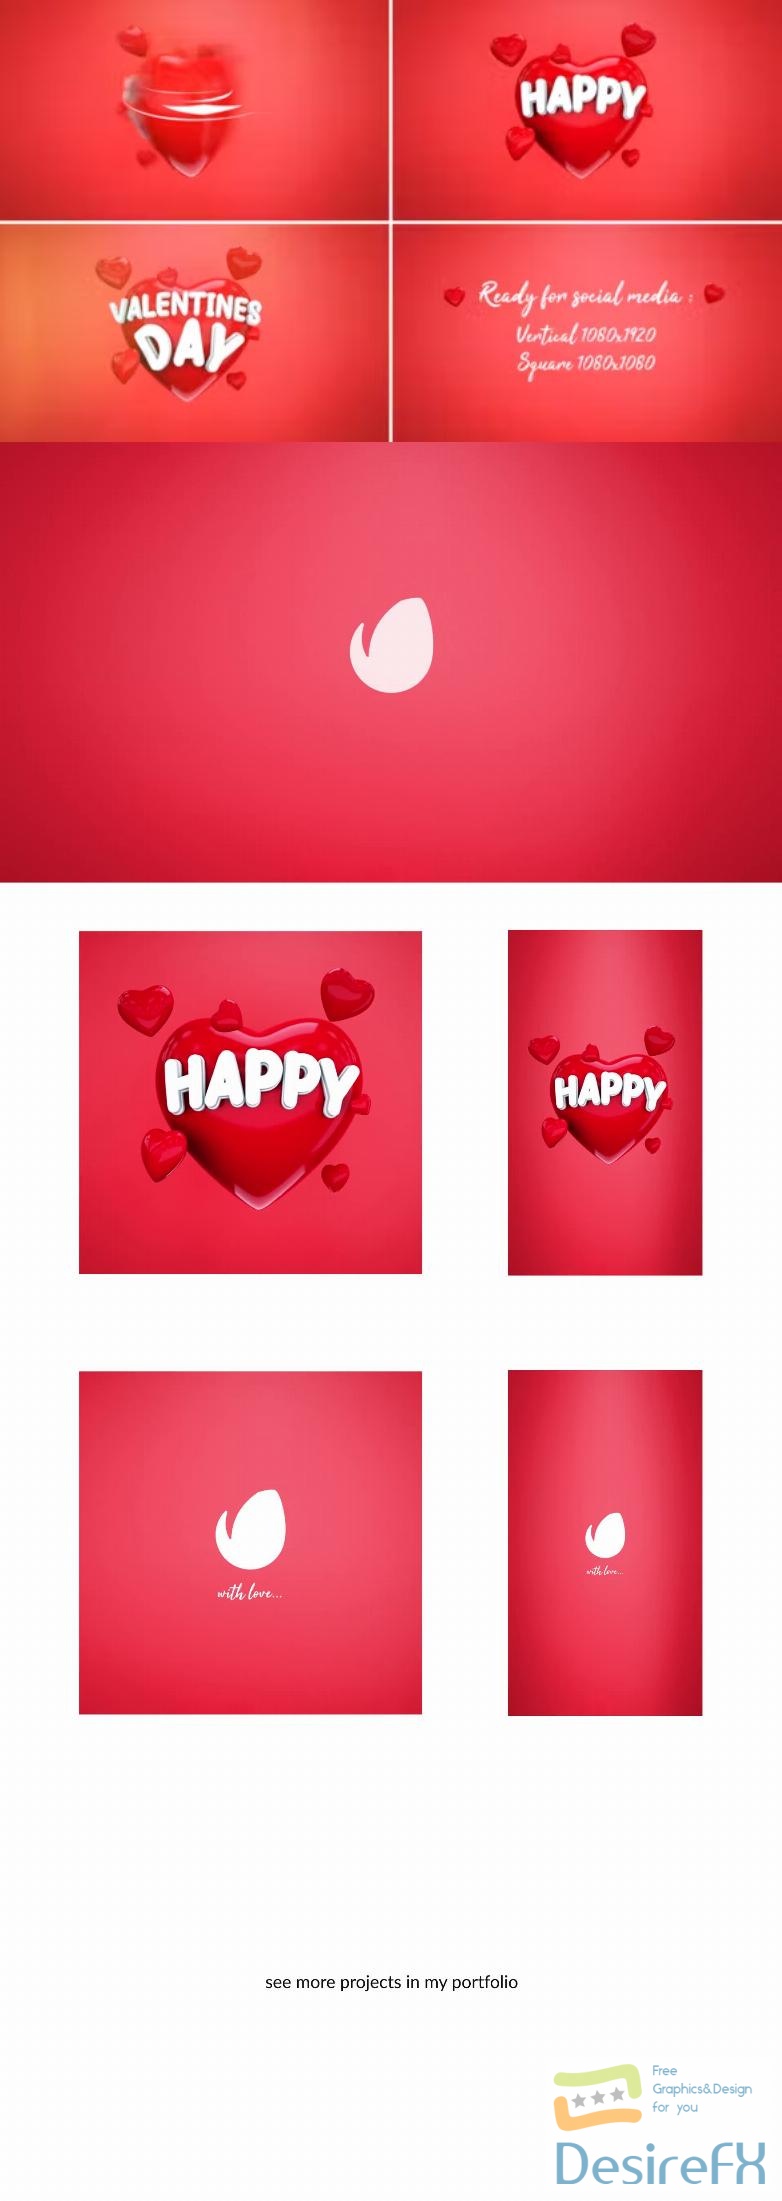 Videohive Valentine's Day Wishes and Logo Reveal 43071249